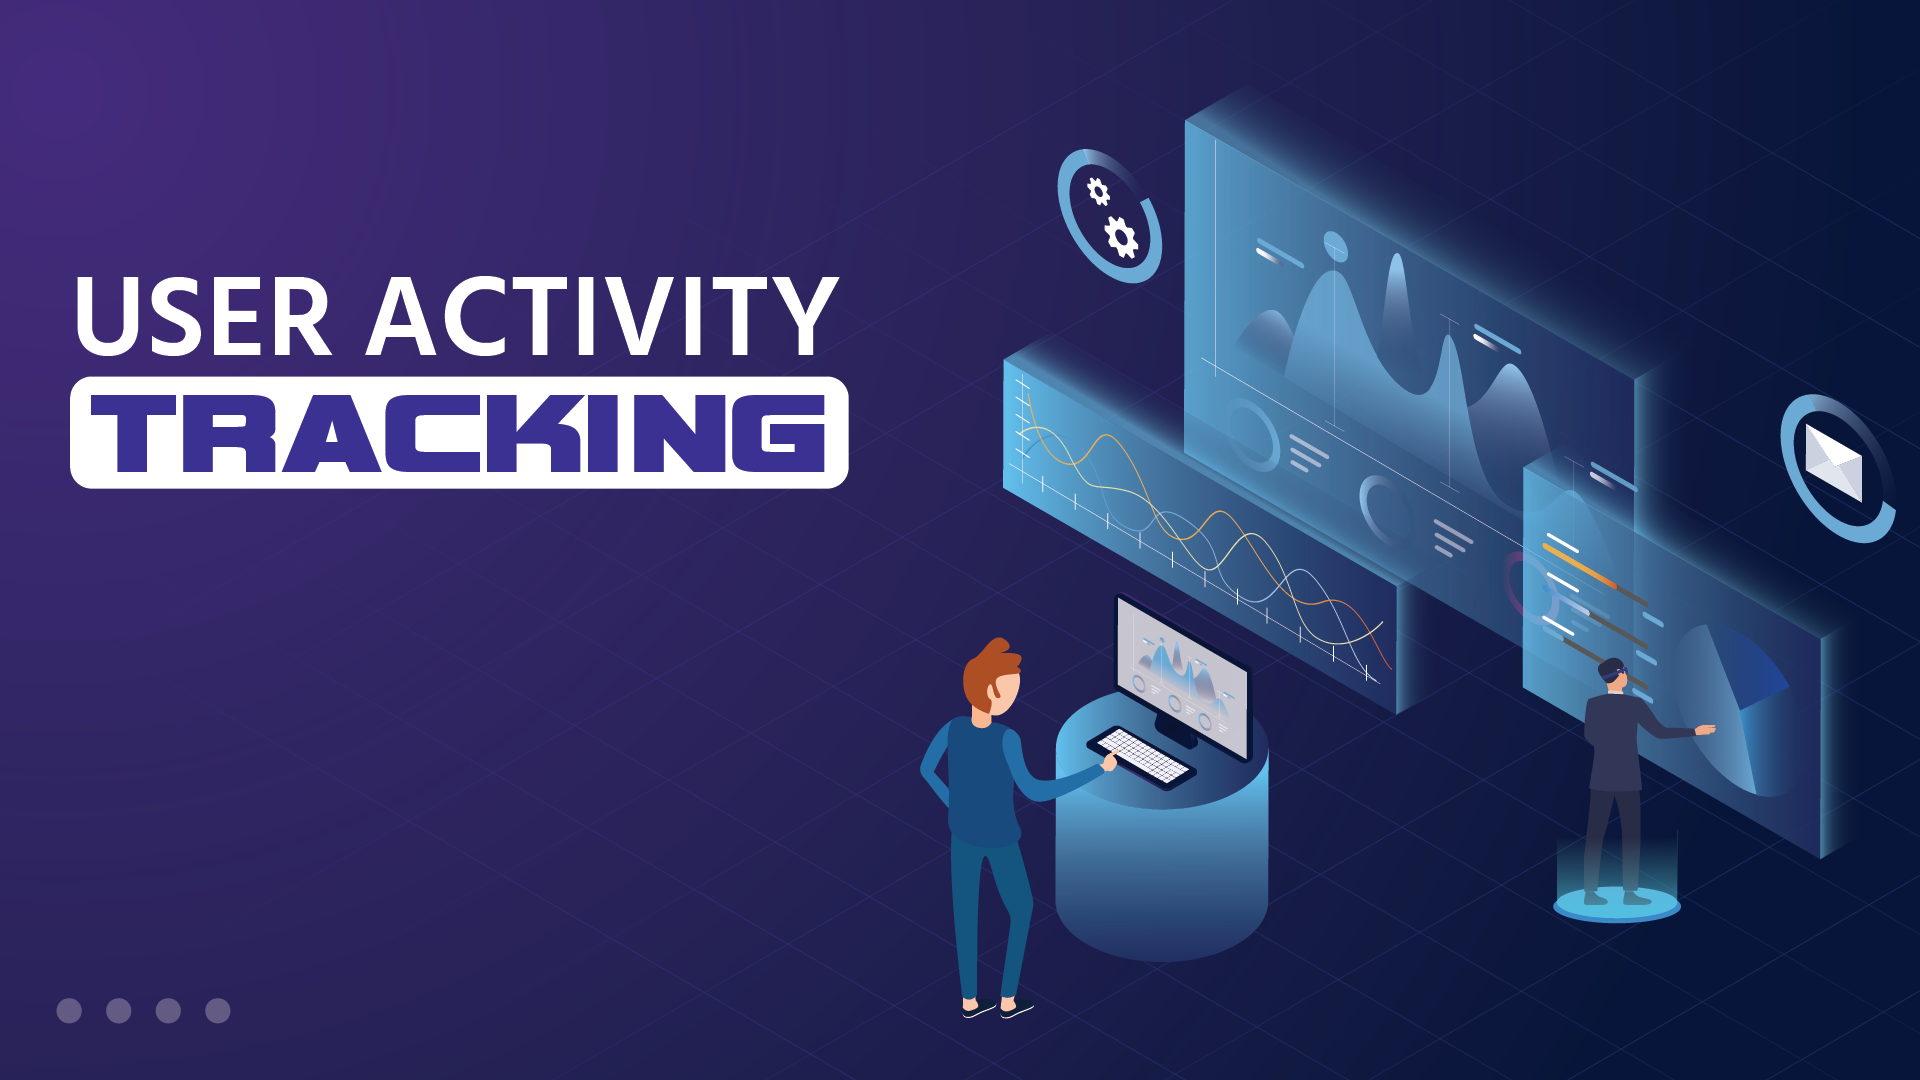 User activity tracking